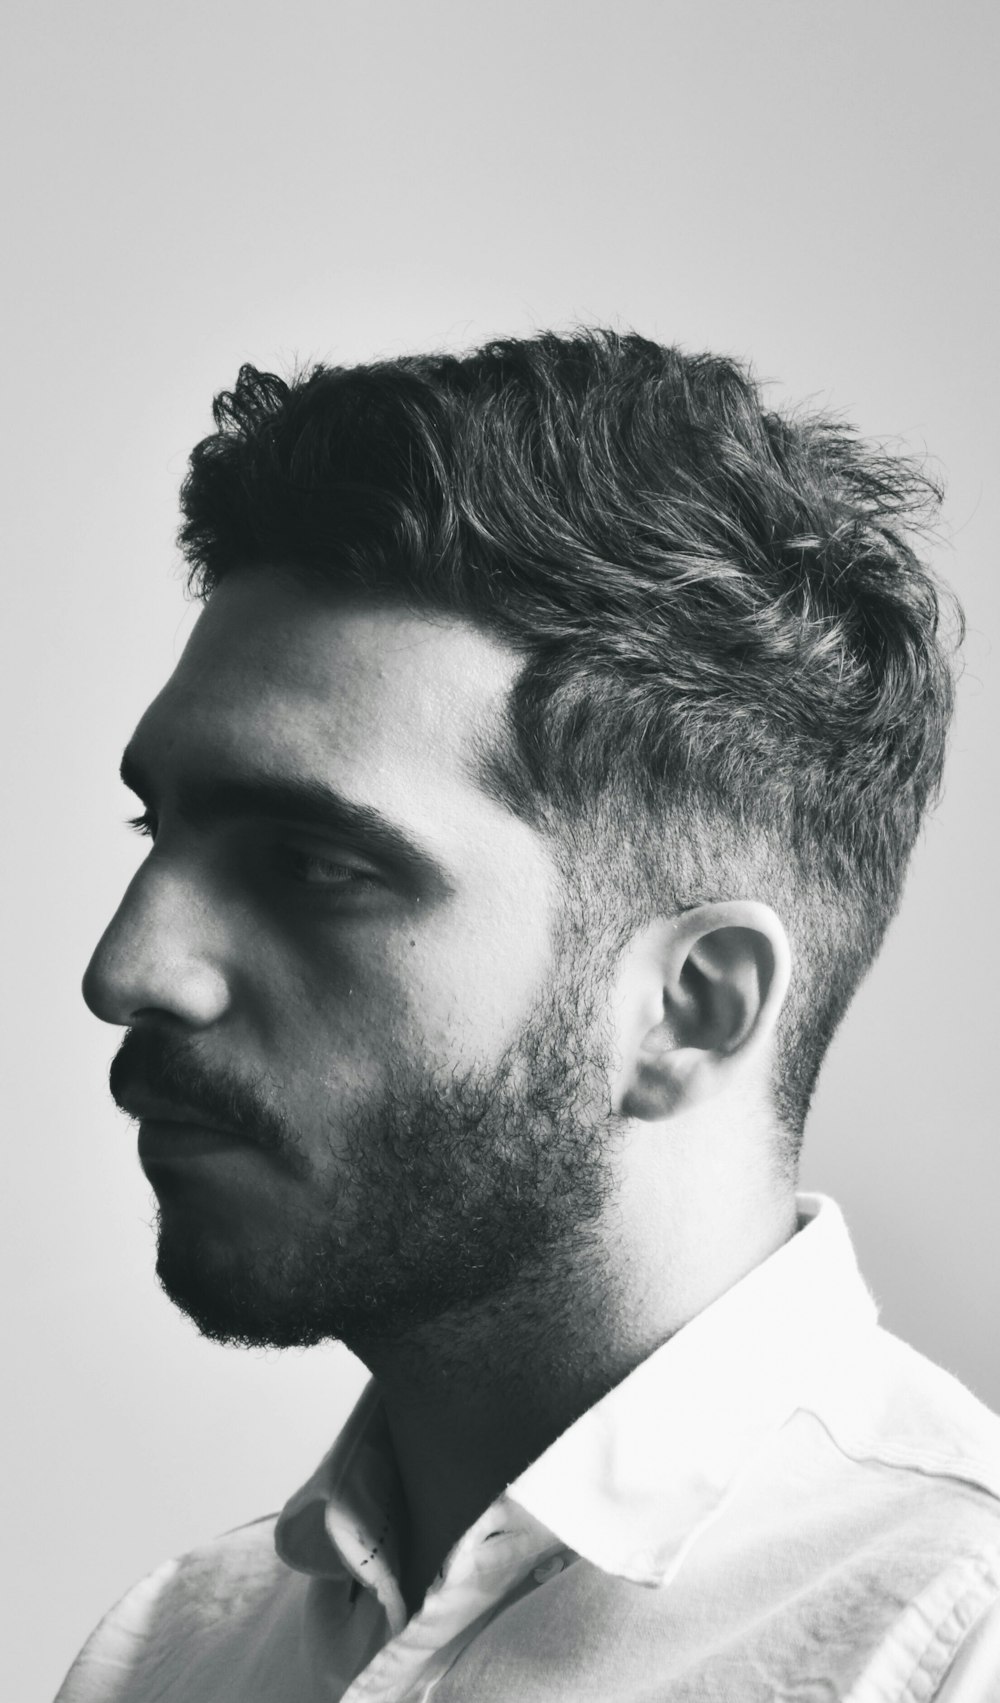 Man Haircut Pictures | Download Free Images on Unsplash